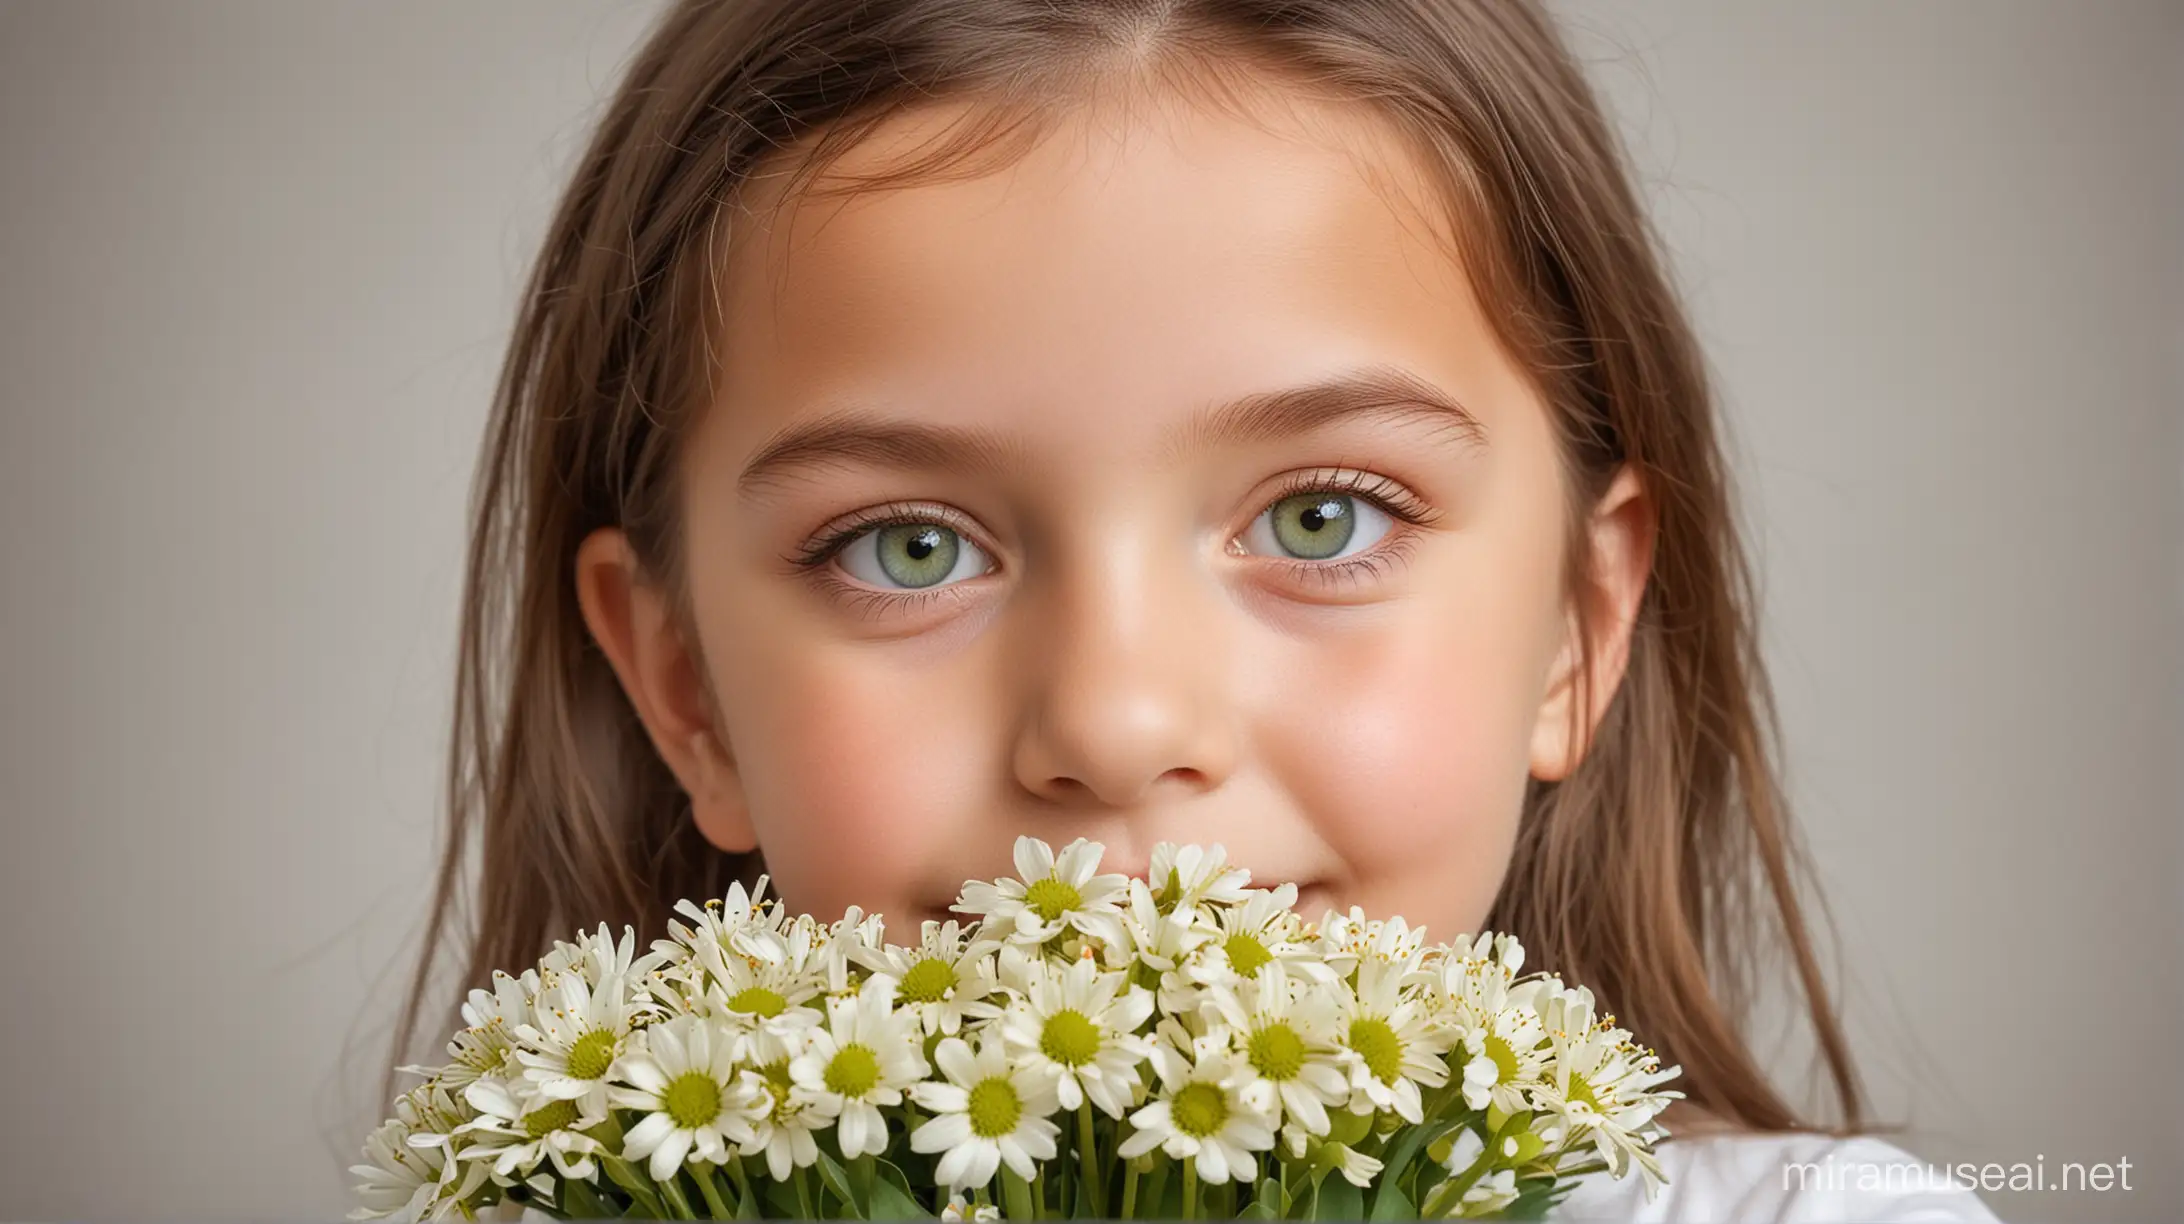 Closeup Portrait of a Little Girl with Green Eyes Holding Flowers